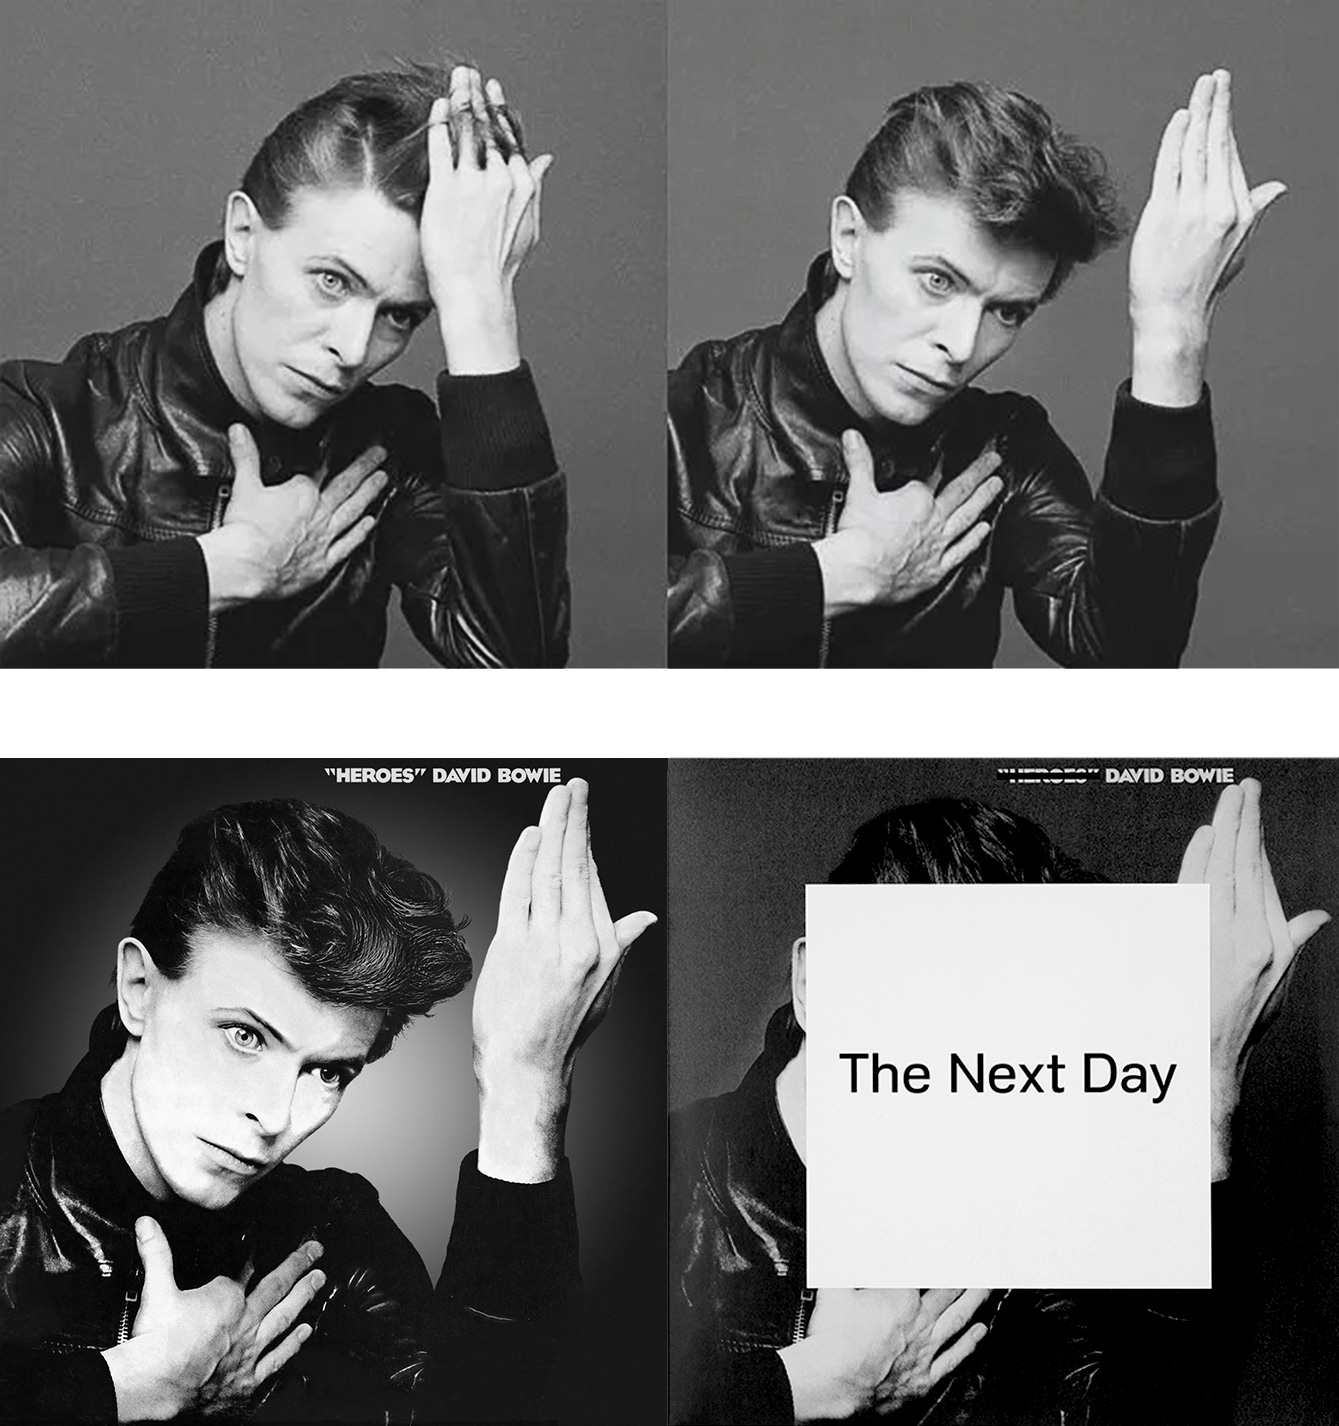 bowie-heroes-next-day-vinyl